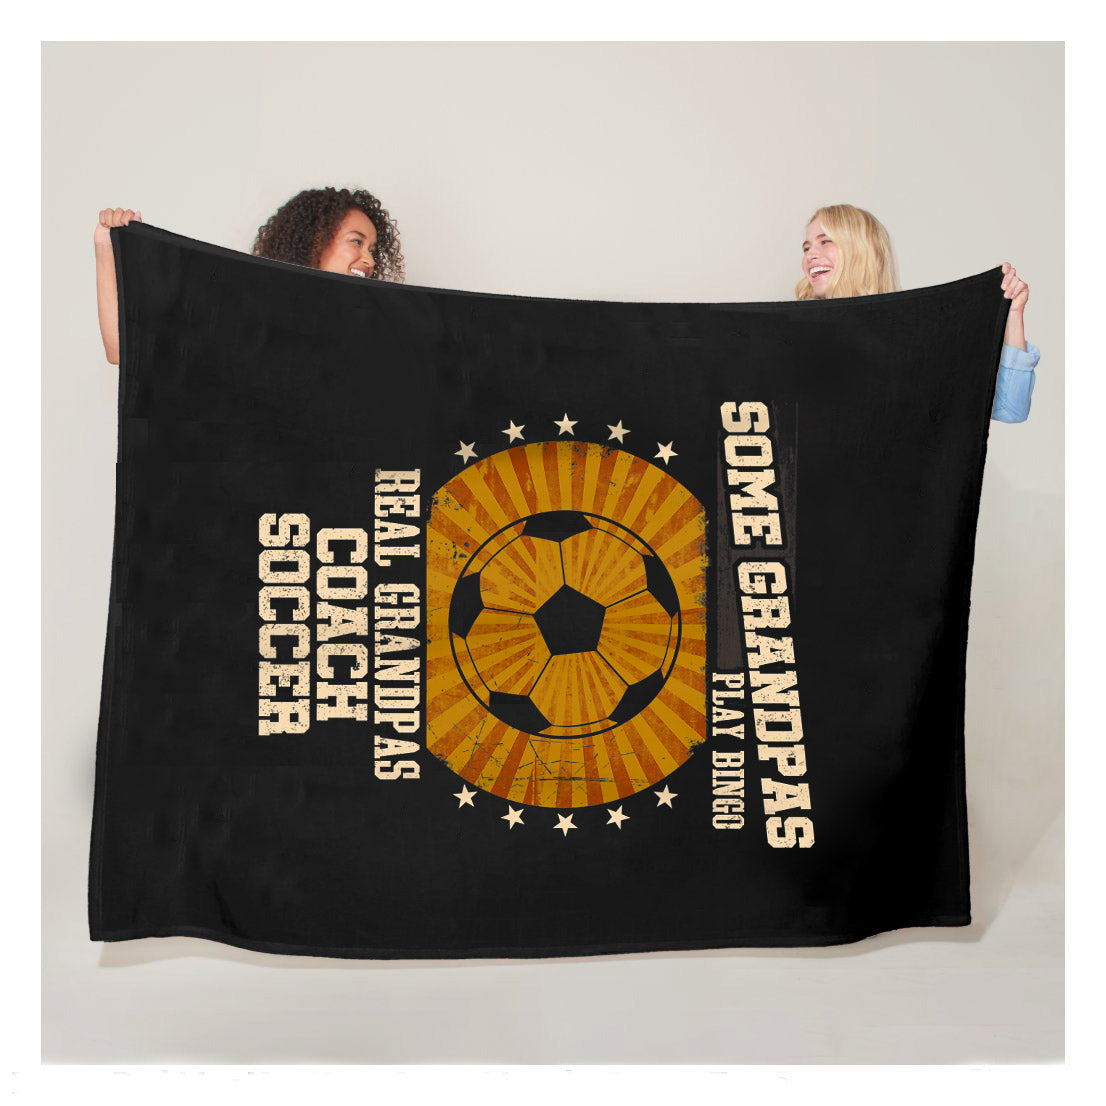 Grandpas Play Bingo Real Grandpas Coach Soccer Sherpa Blanket,  Soccer Blankets, Soccer Gifts, Happy Fathers Day Gift Ideas For Grandpa